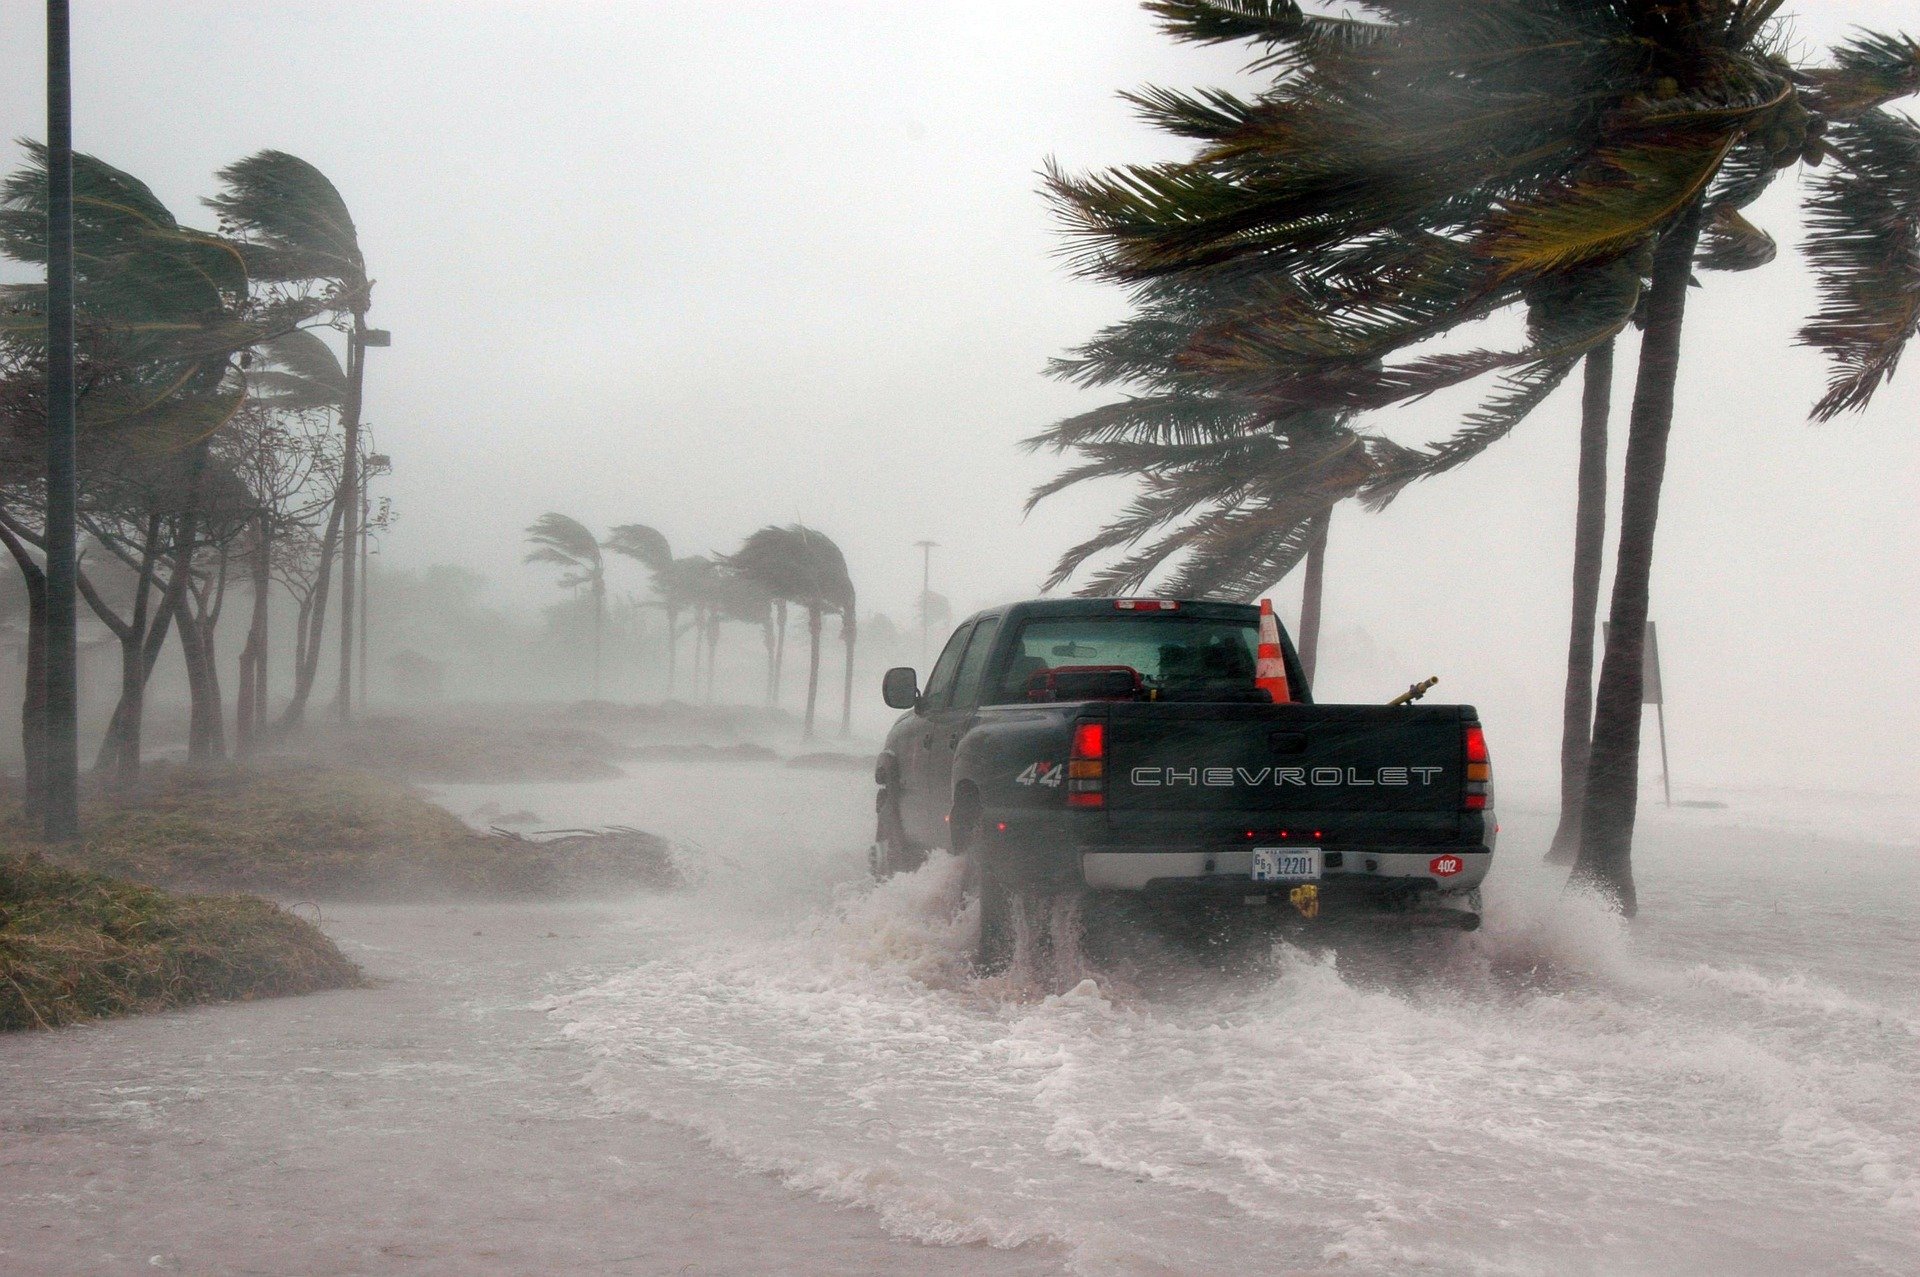 Featured image for “NOAA Awards $11M for Coastal and Infrastructure Resilience Research”